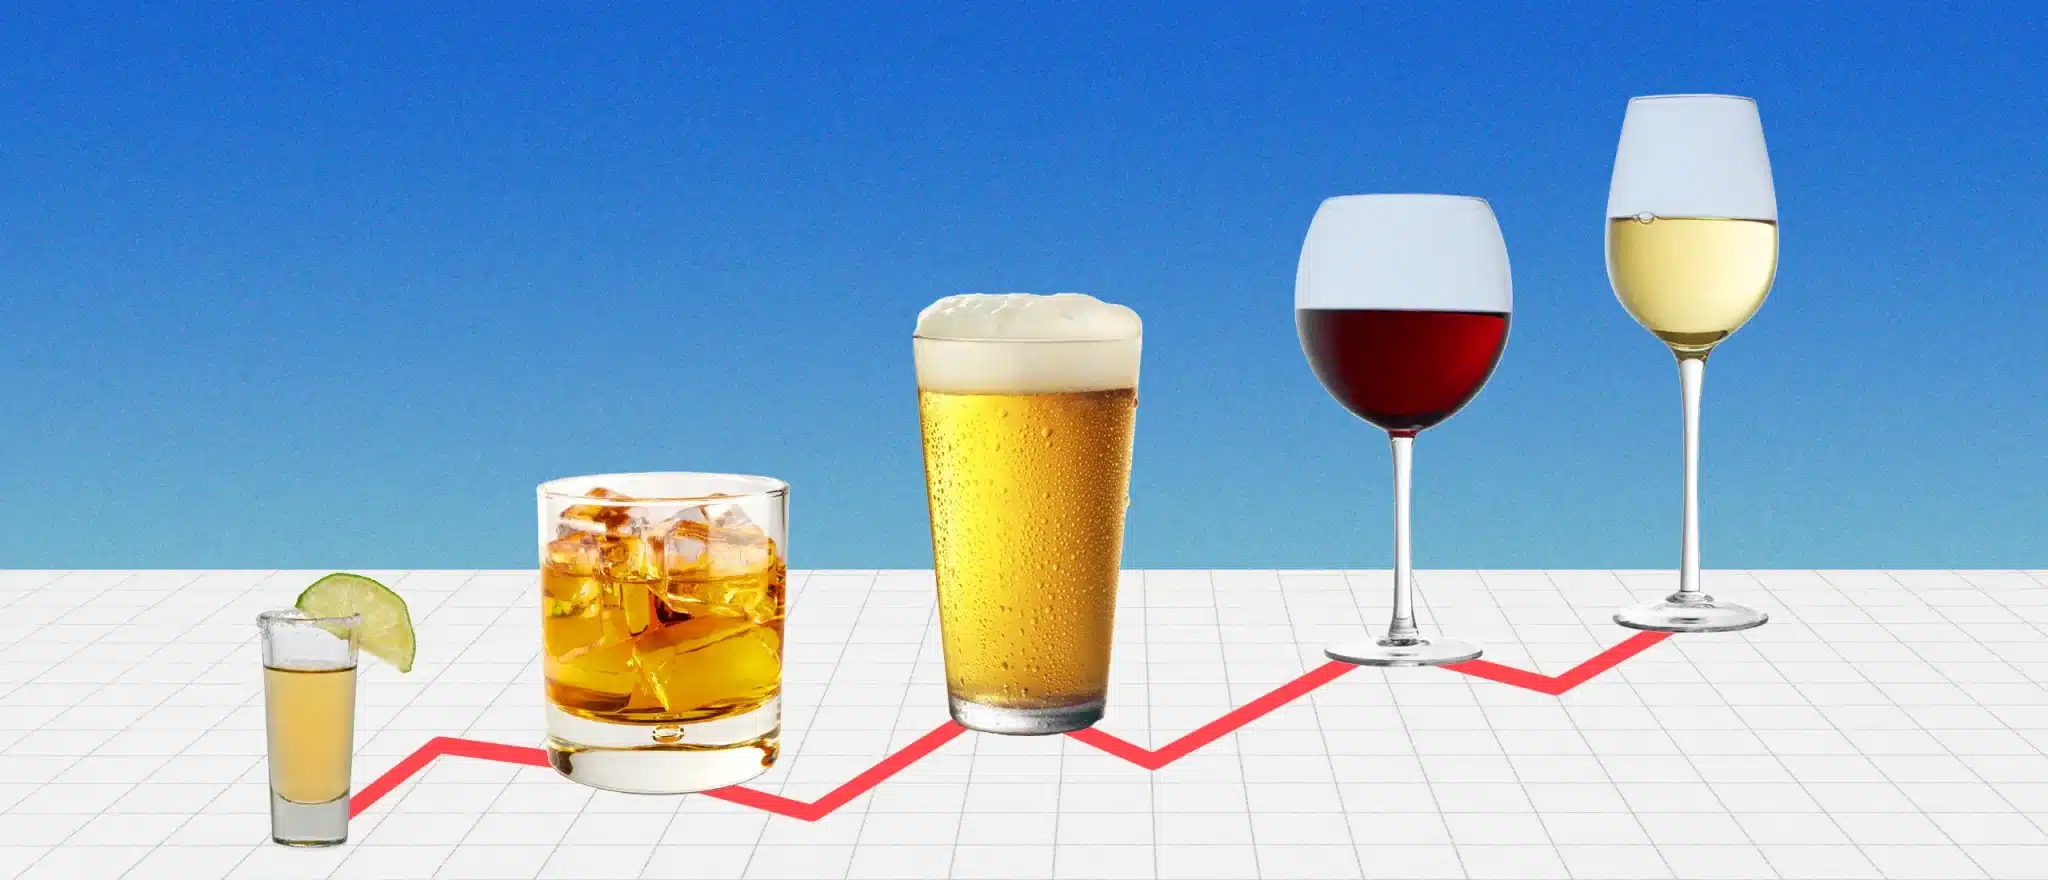 Does Alcohol Shorten—or Lengthen—Your Life? Longevity Experts Weigh In